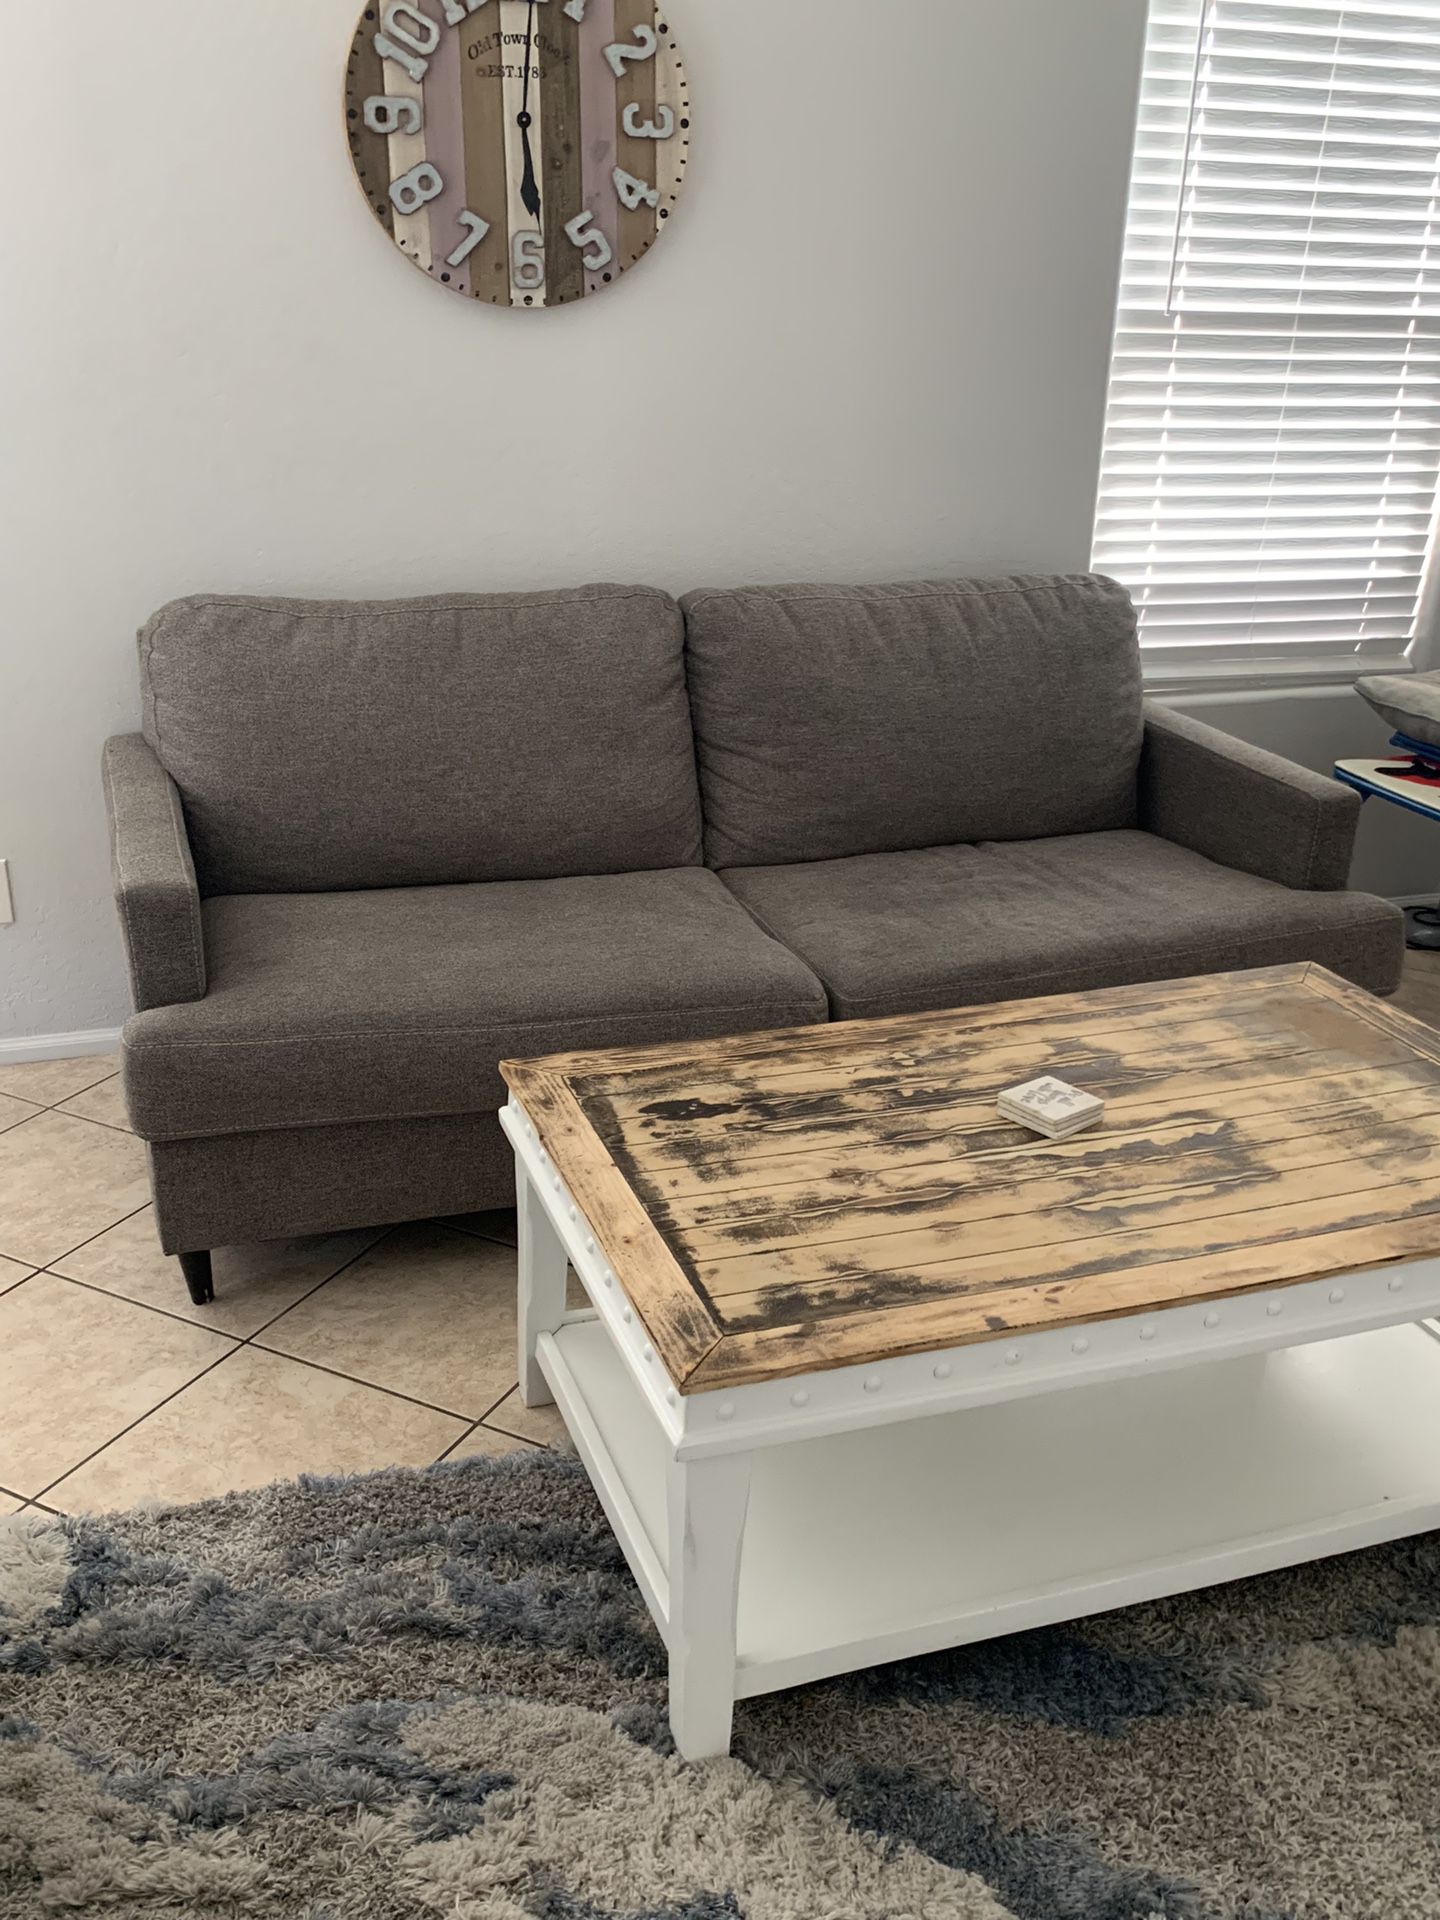 Couch & Table 